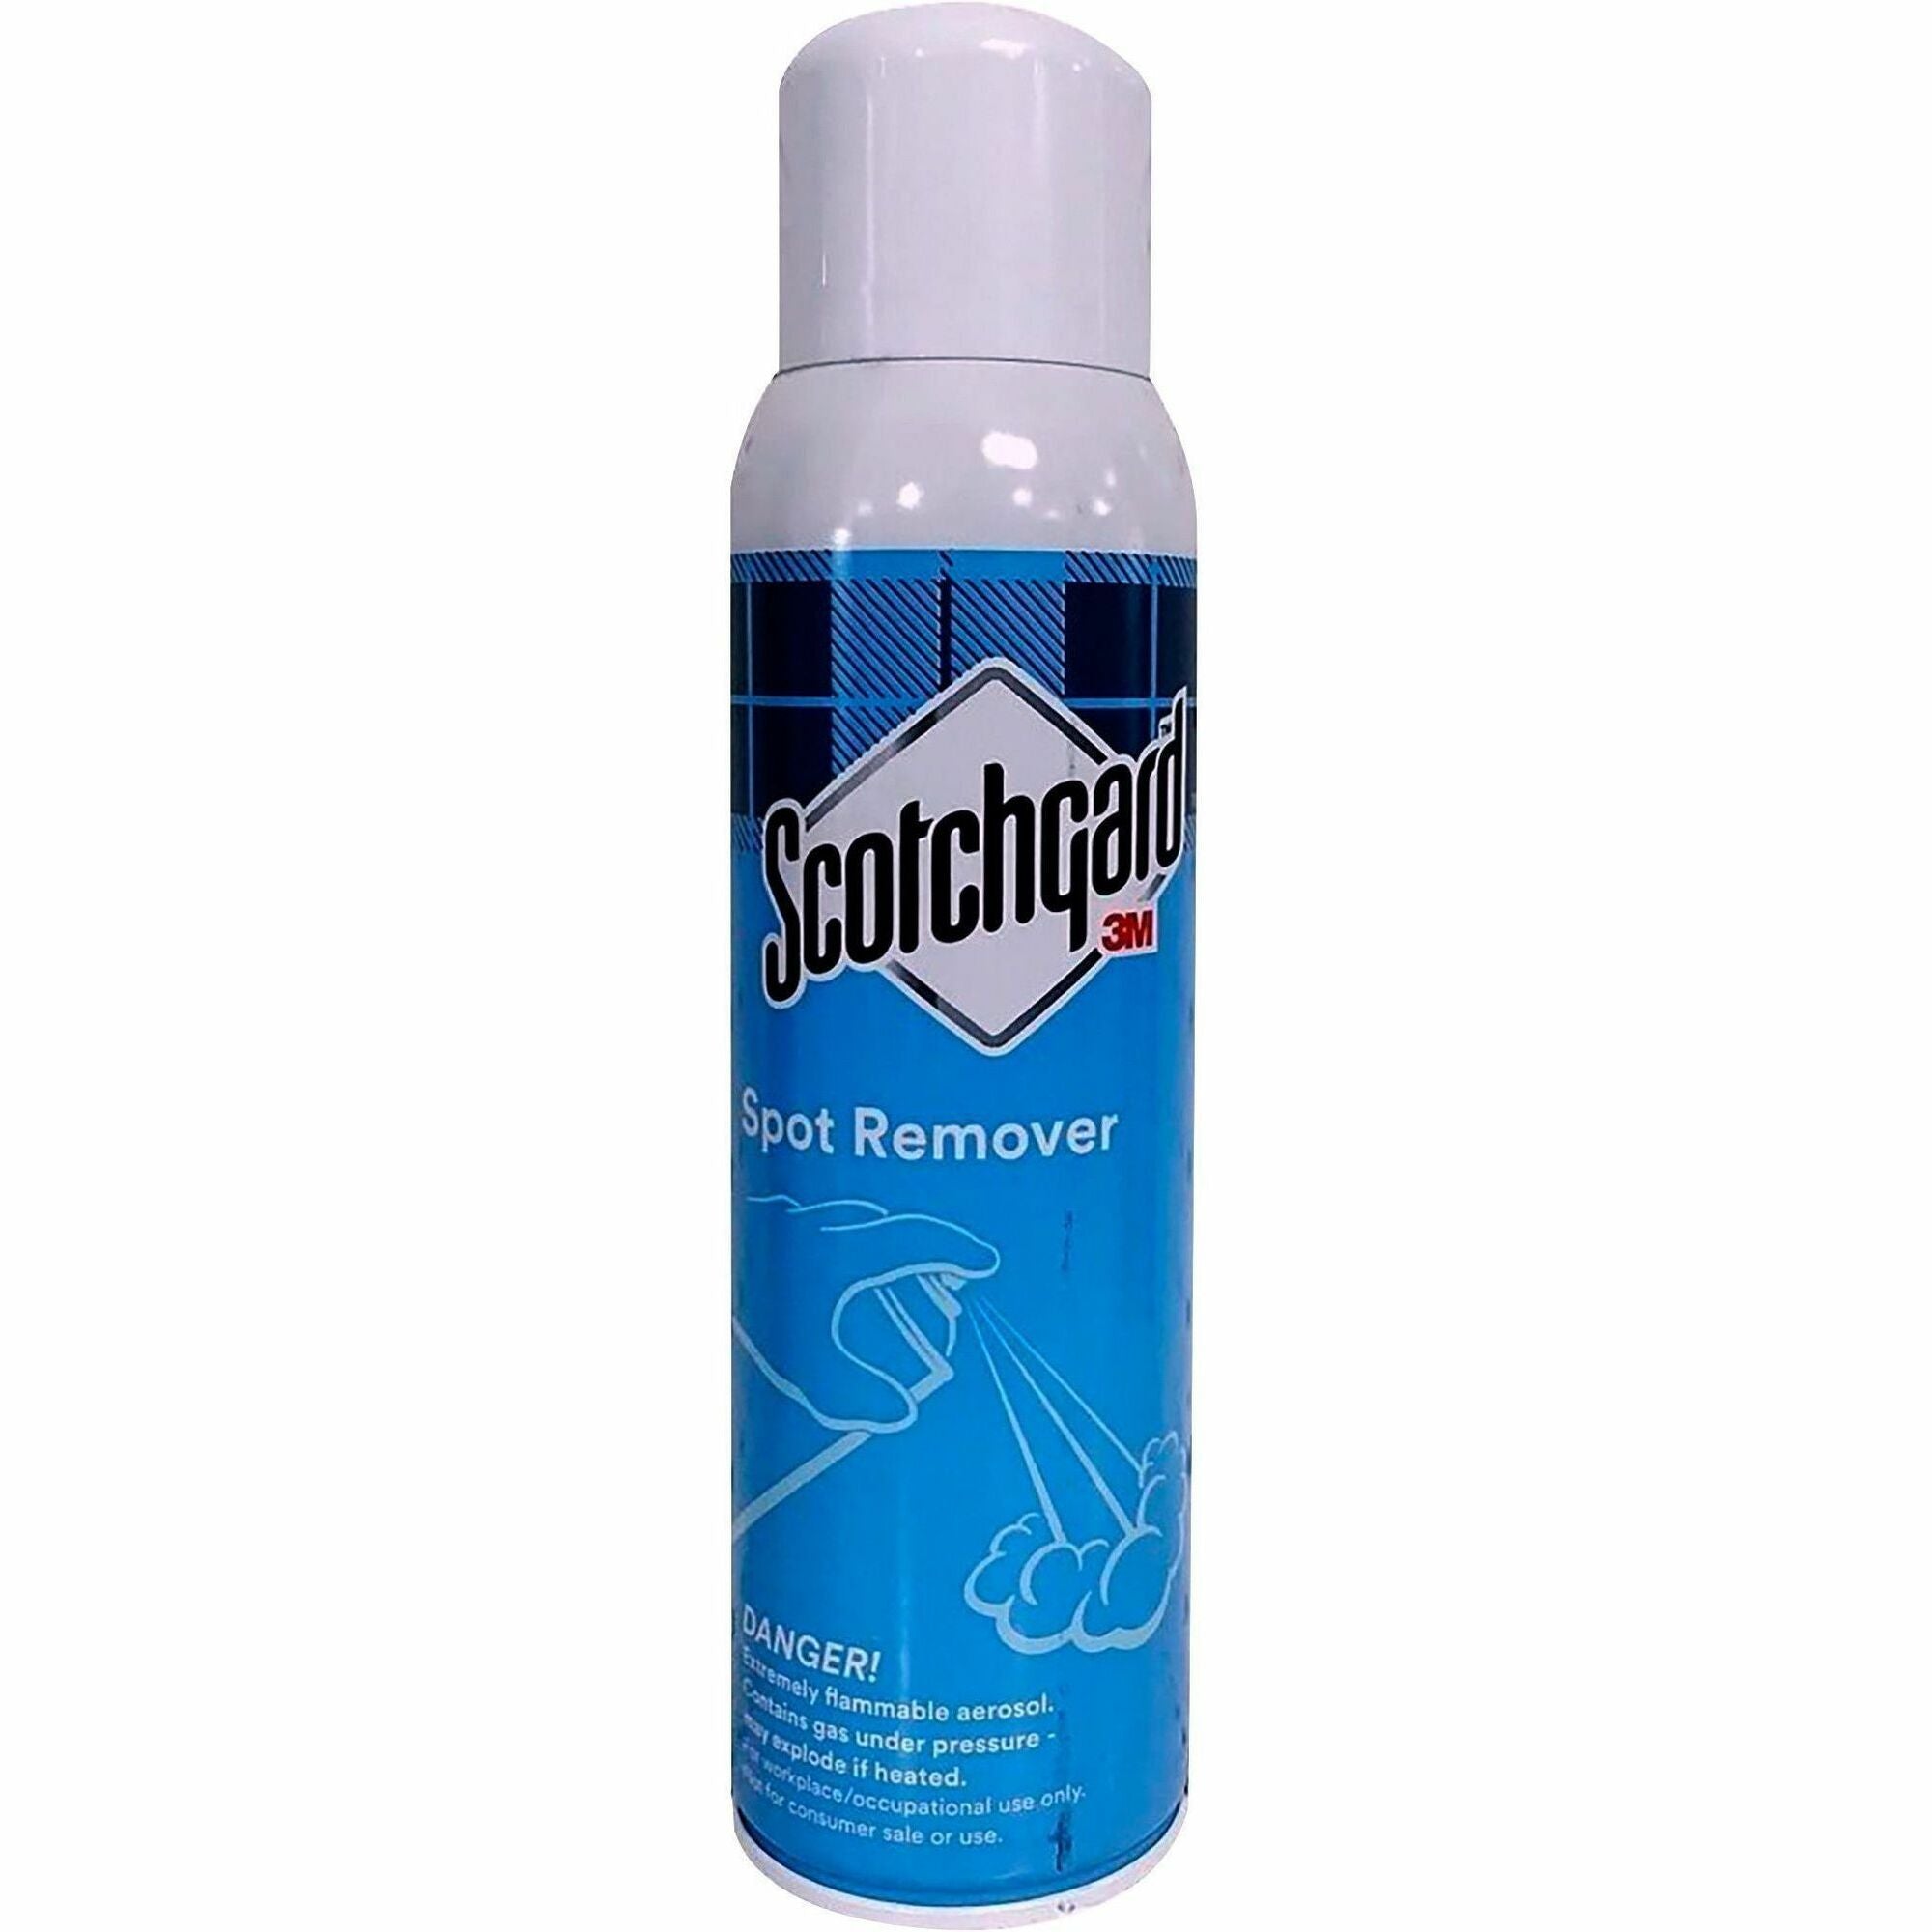 Scotchgard Spot Remover/Upholstery Cleaner - 17 fl oz (0.5 quart) - 1 Each - Chemical Resistant, Moisture Resistant, Absorbent, Rinse-free, Non-sticky, Residue-free, Anti-resoiling, Non-flammable - White - 